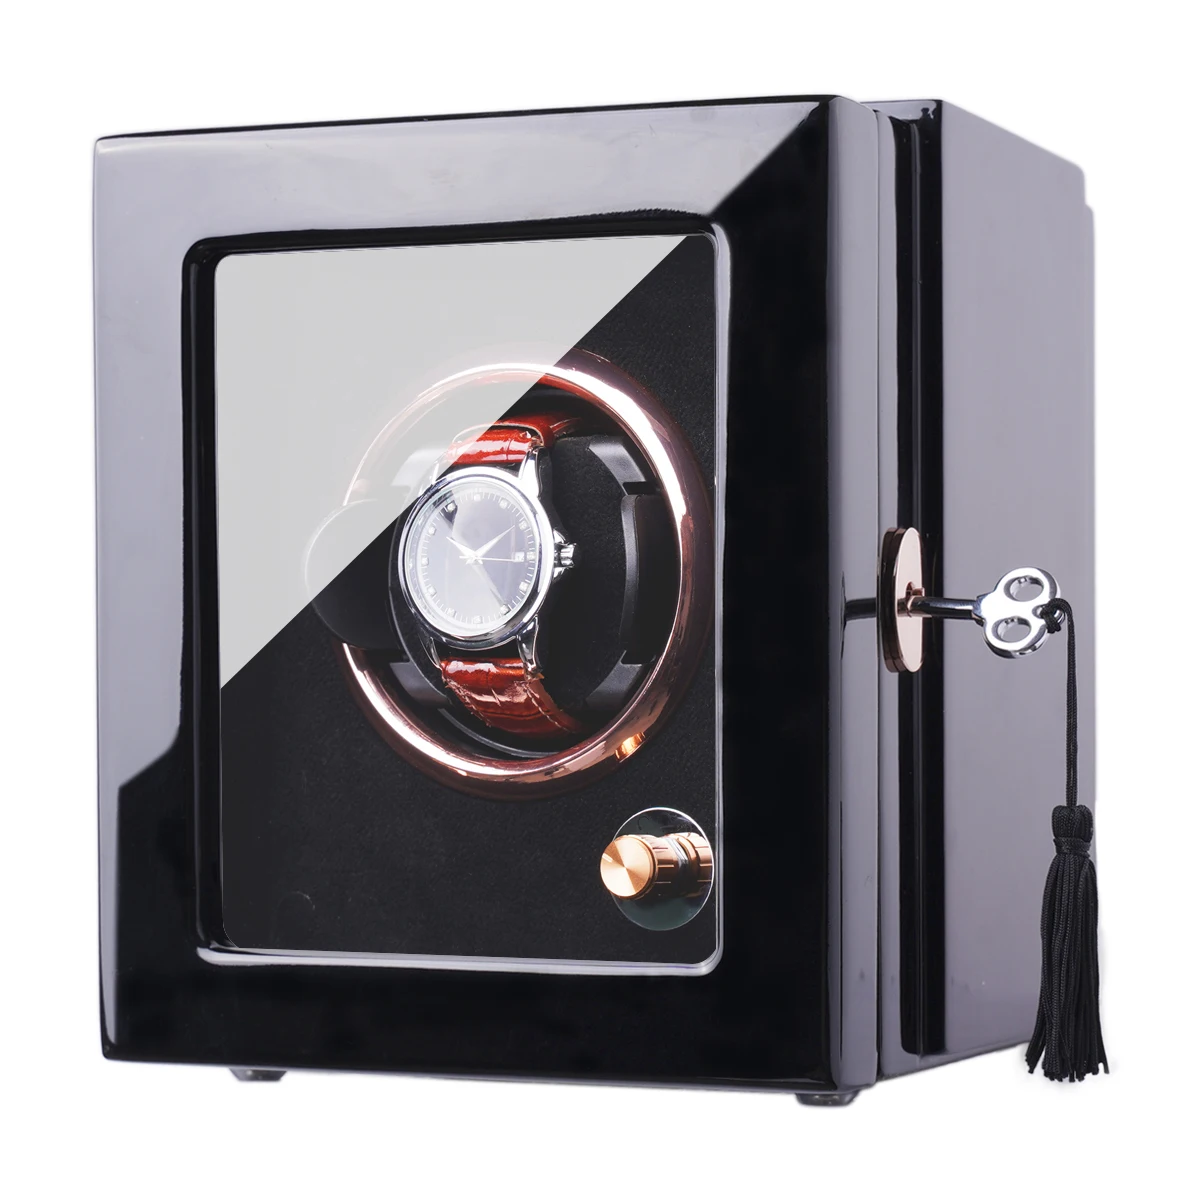 

20%Off Custom 10 Layer Varnish 1 Slot Mabuchi Motor High-end Luxury Watch Box Safe Automatic Watch Winder, Picture shows